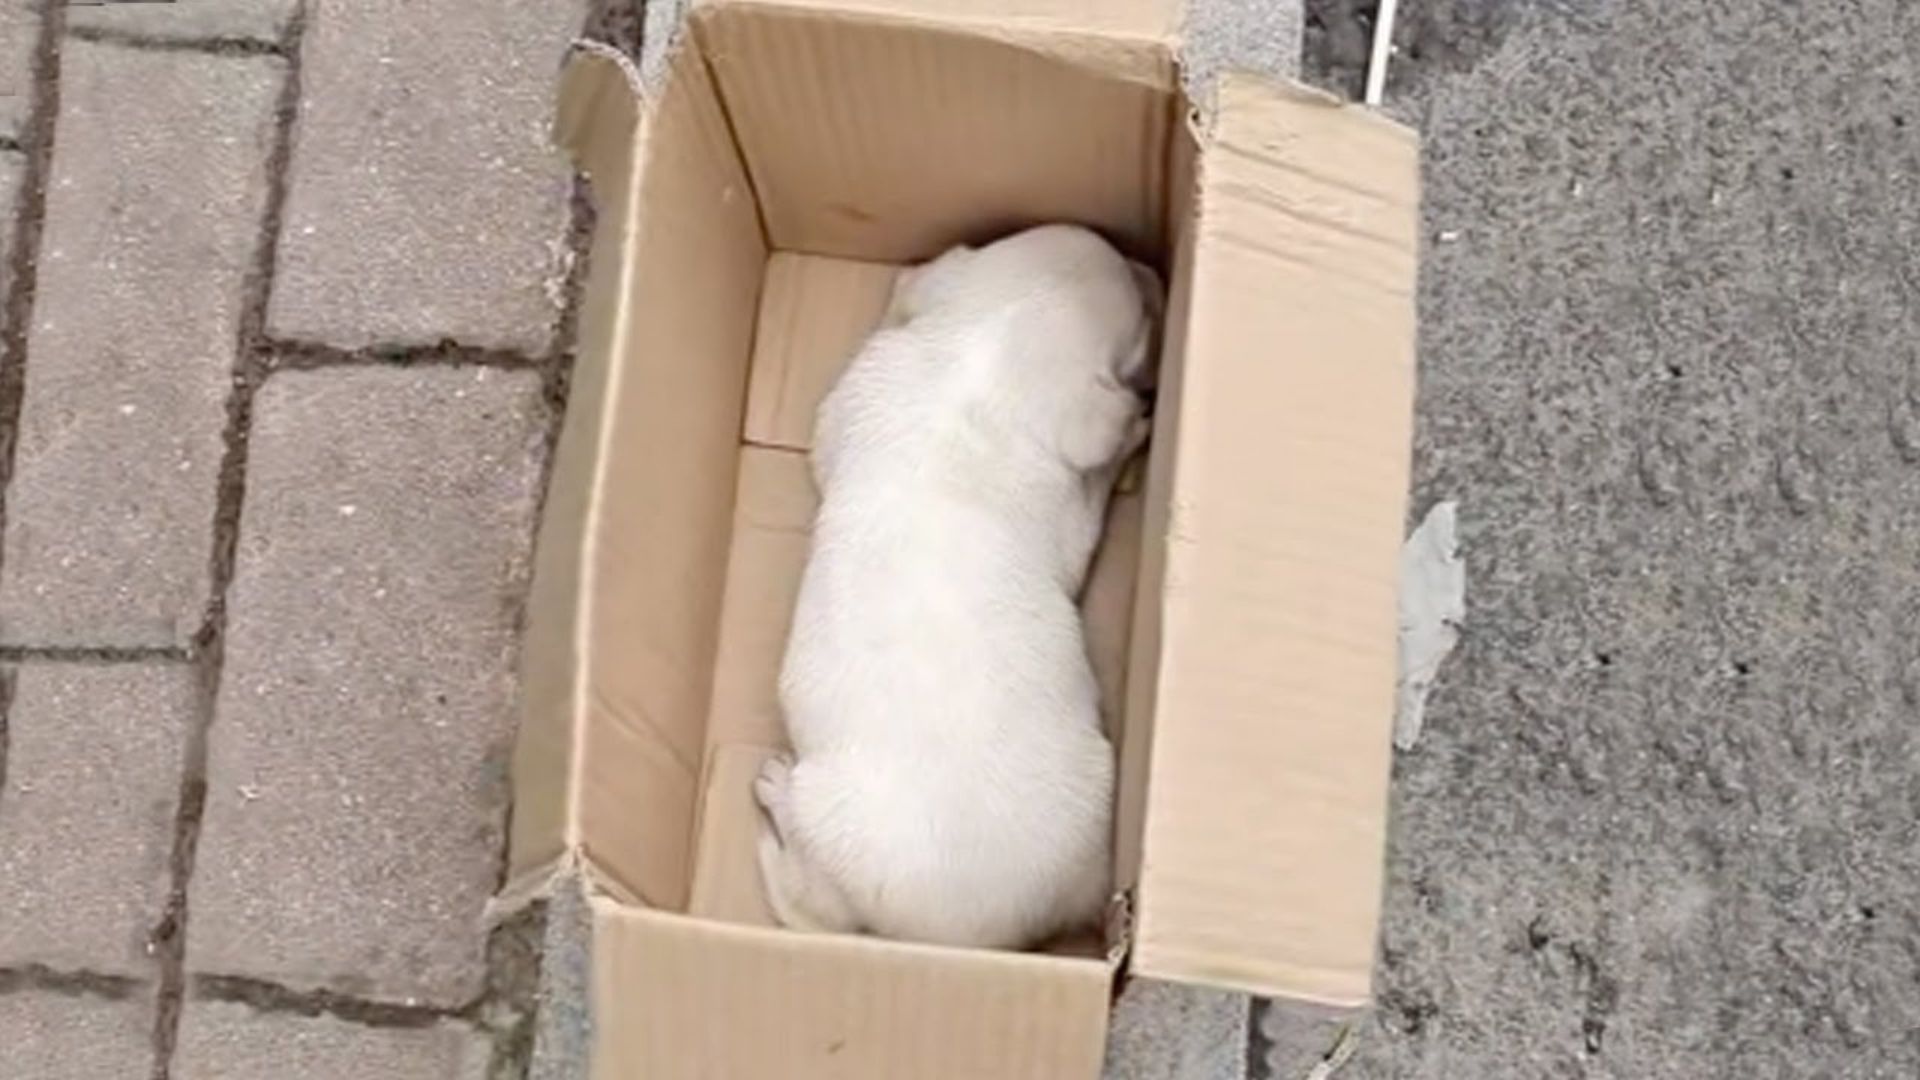 Shivering Puppy Was Living In A Small Box Until A Kind Person Came To His Aid